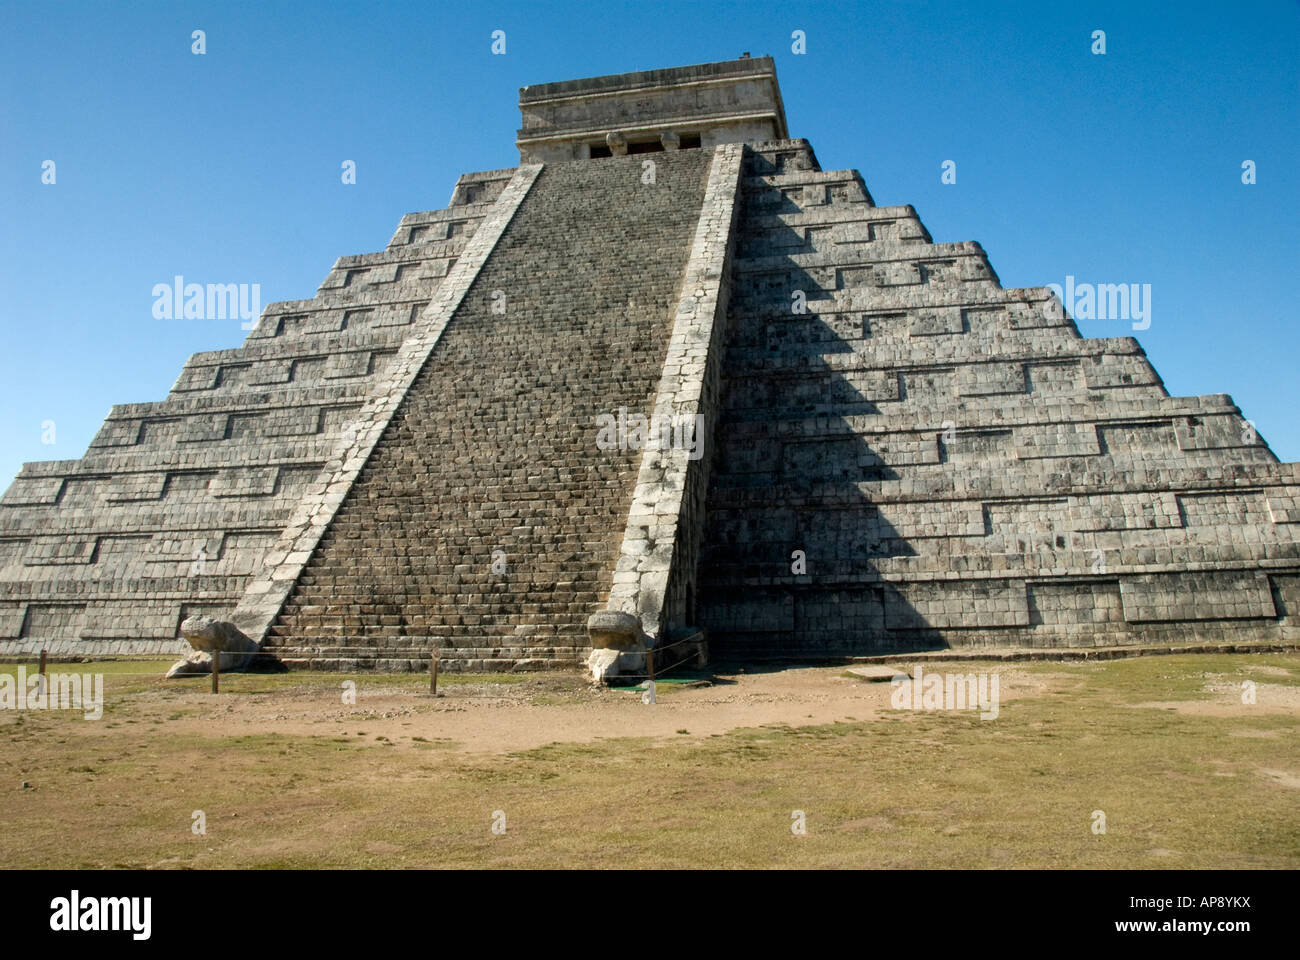 Chichen Itza is a large pre-Columbian archaeological site built by the Maya civilization located in the Yucatán, Mexico Stock Photo